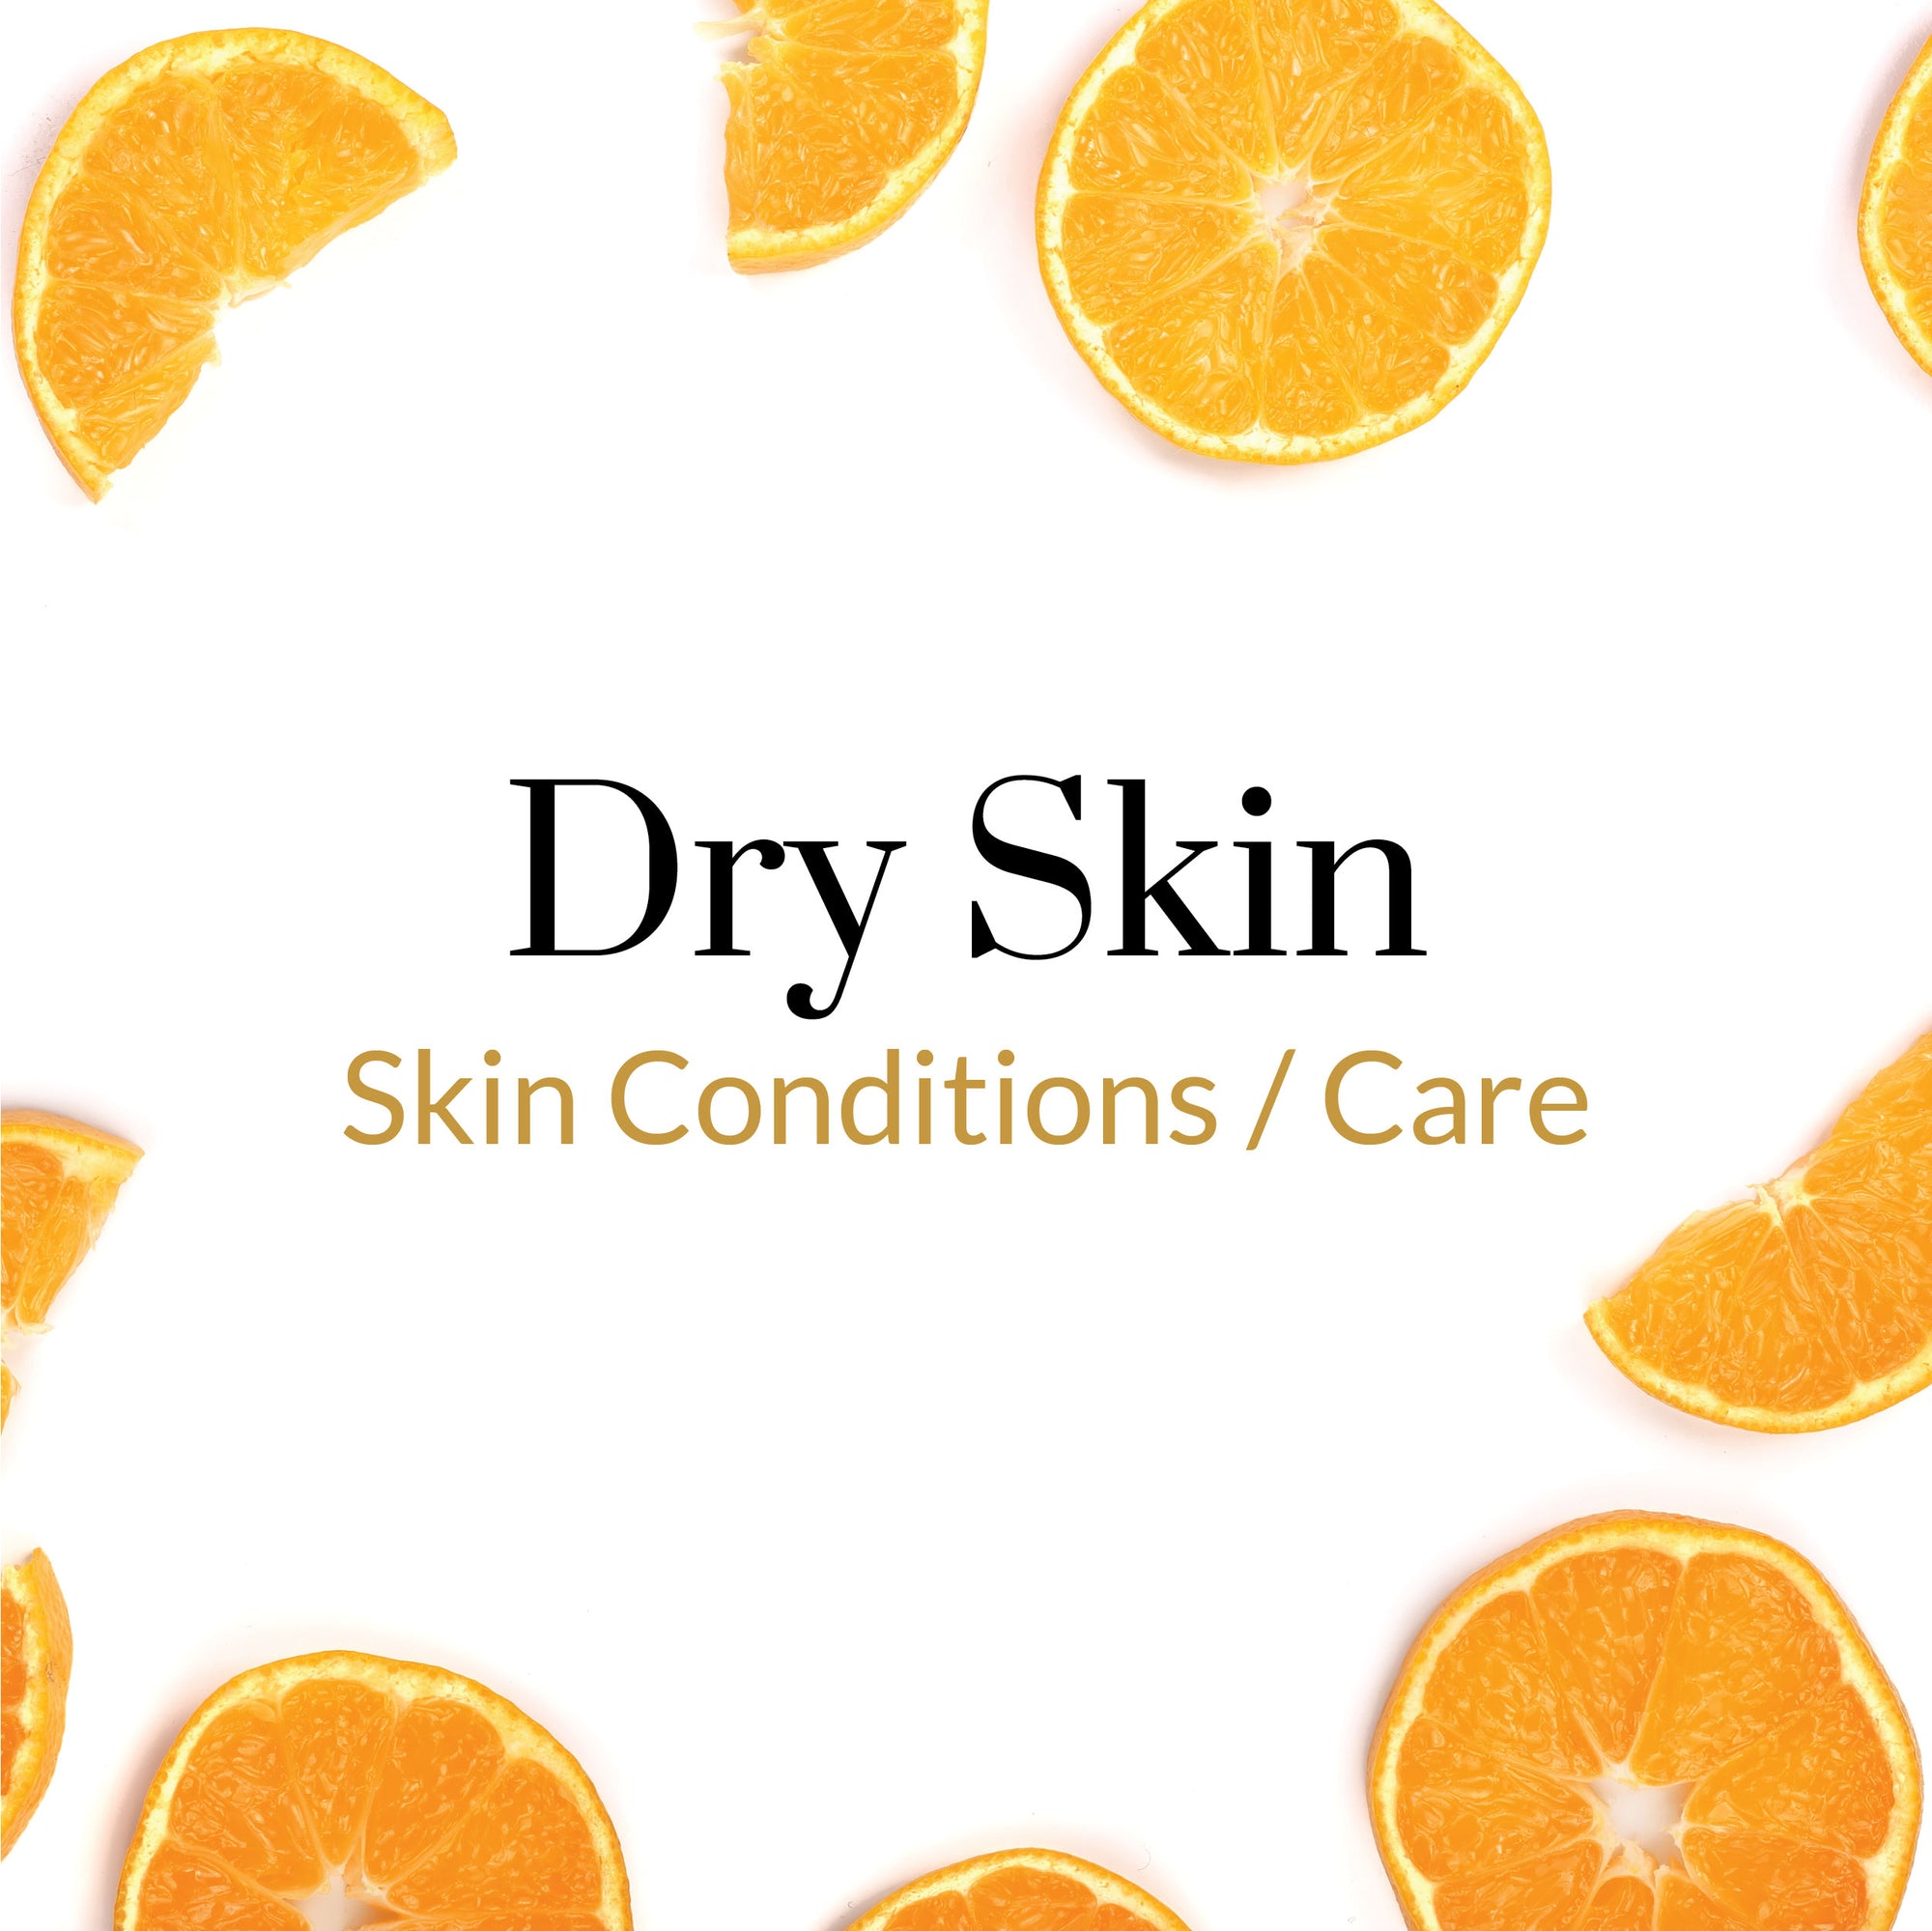 Skin Conditions/Care - Dry Skin